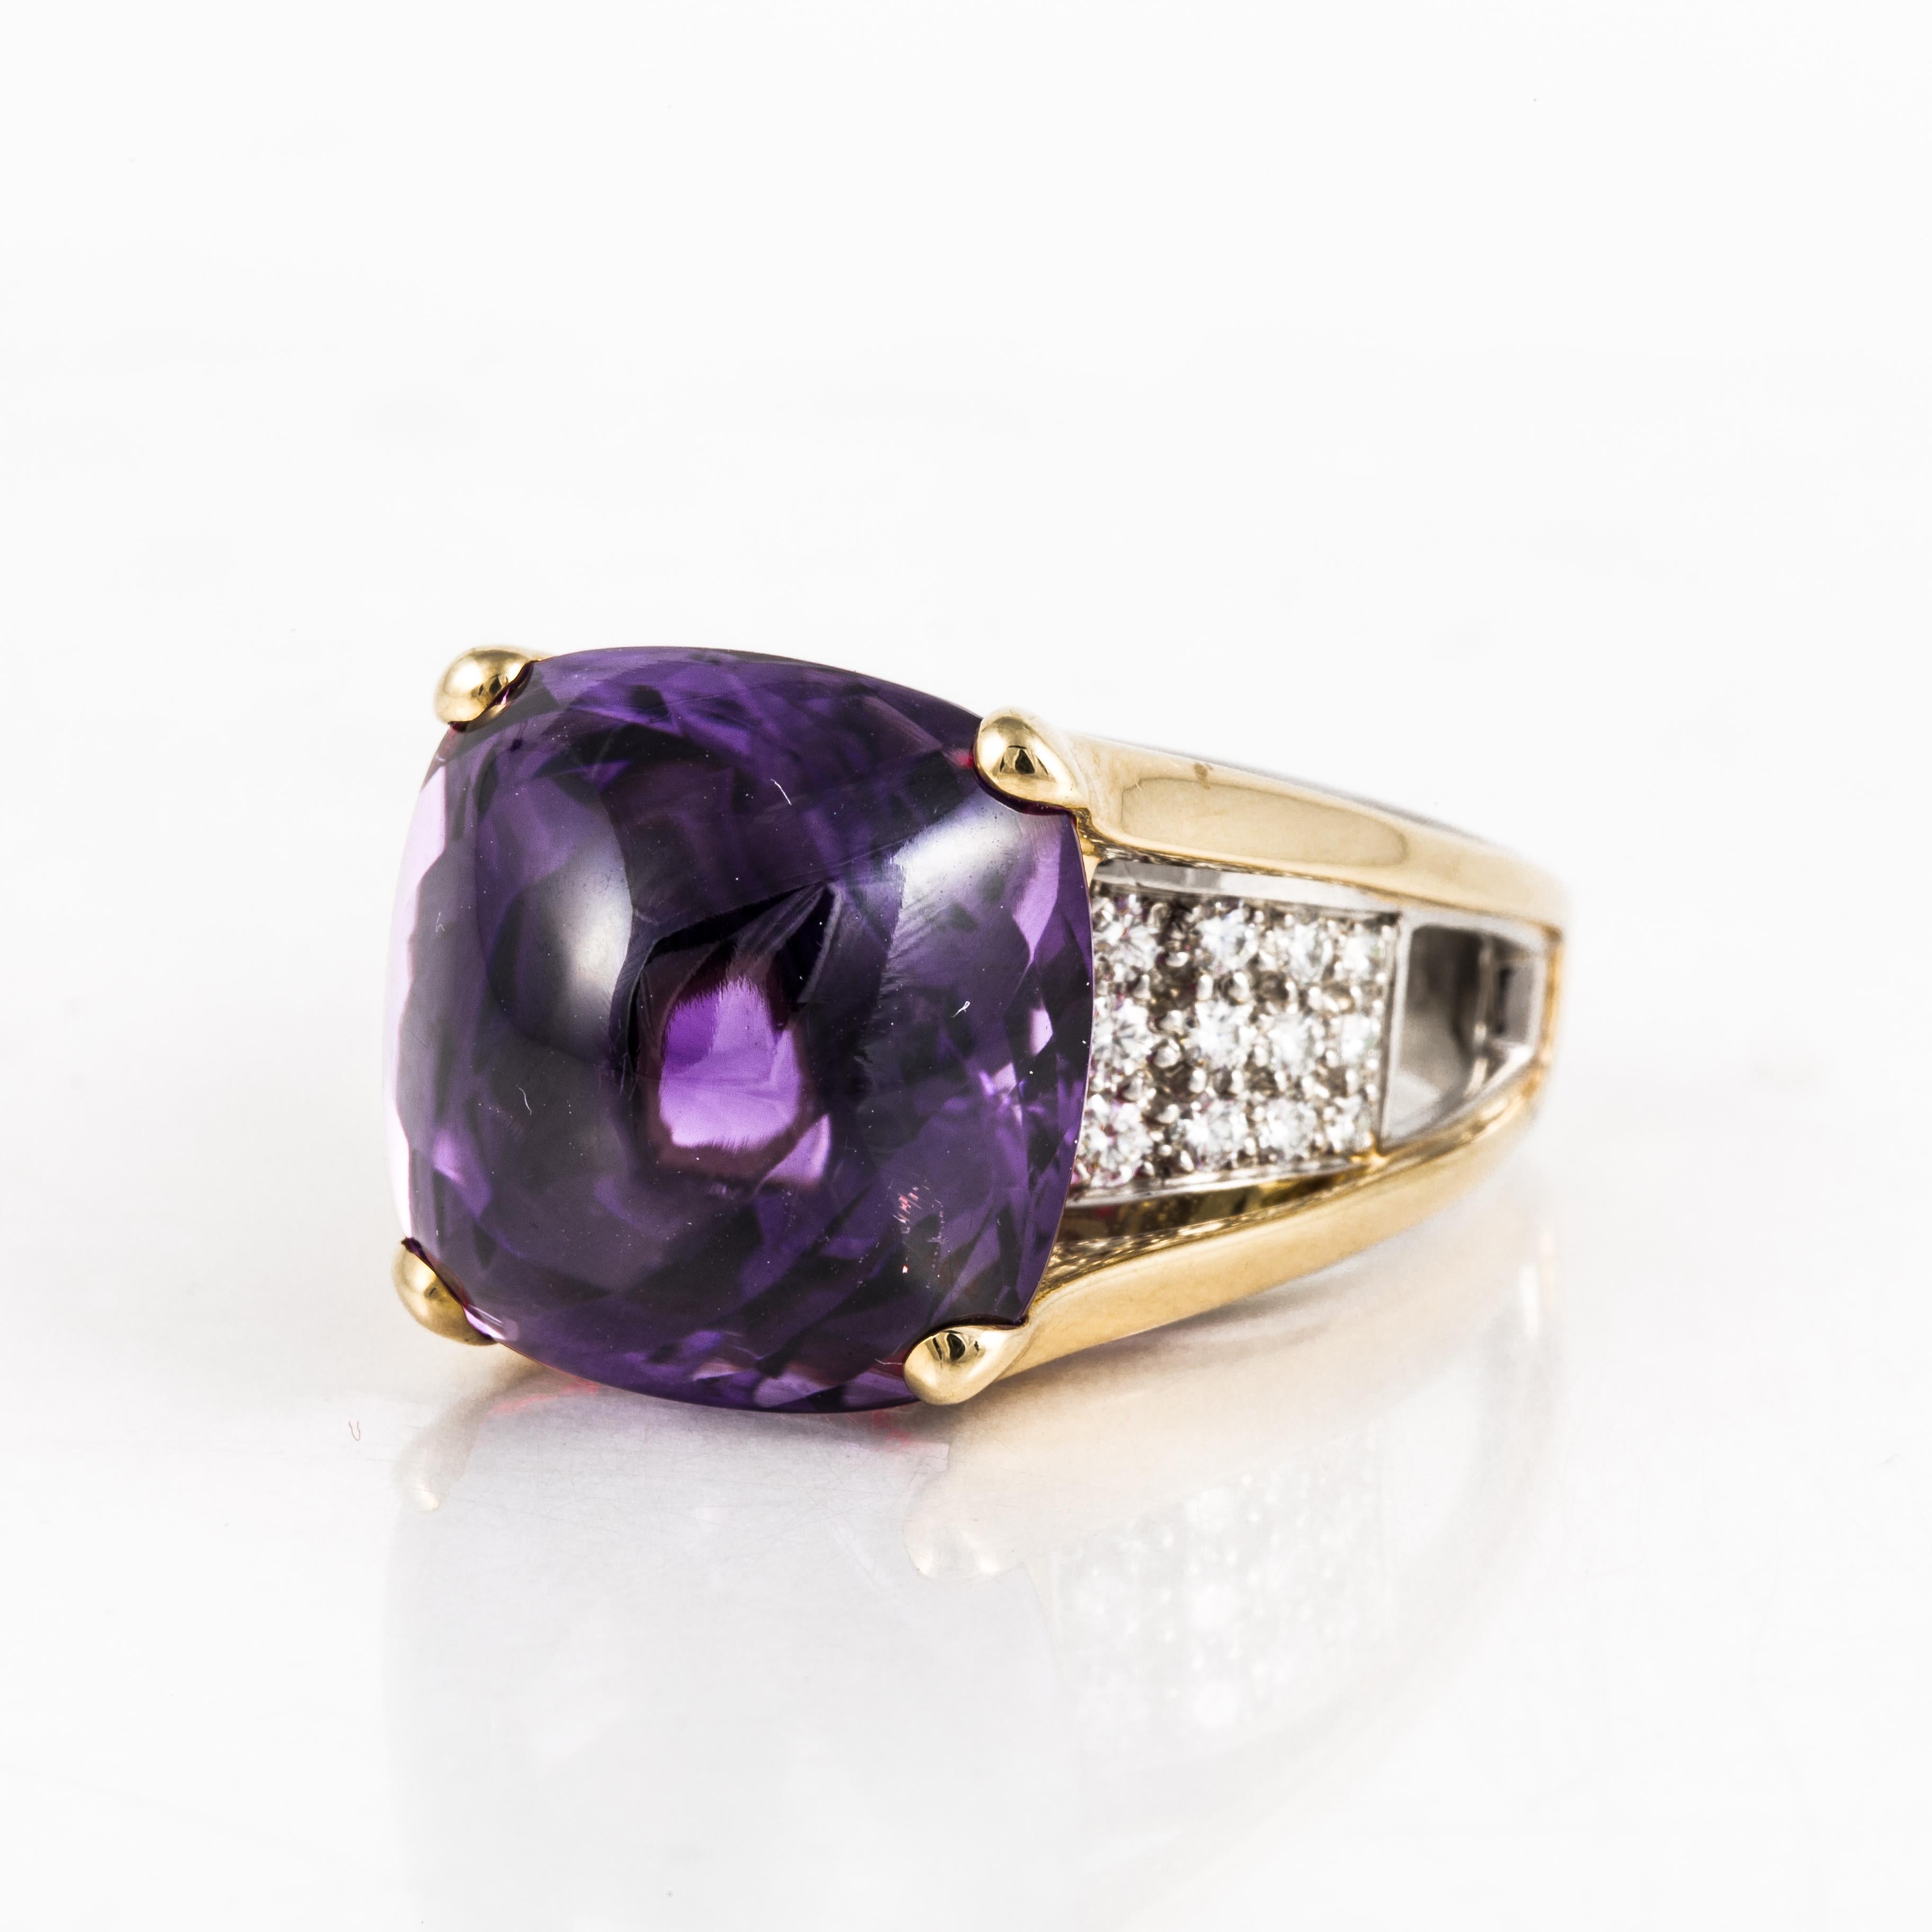 18K yellow and white gold ring featuring a cabochon amethyst sitting above diamonds.  The twenty-four round diamonds total 1 carat, G-H color and VS clarity.  The ring is currently a size 10.  Measures 13/16